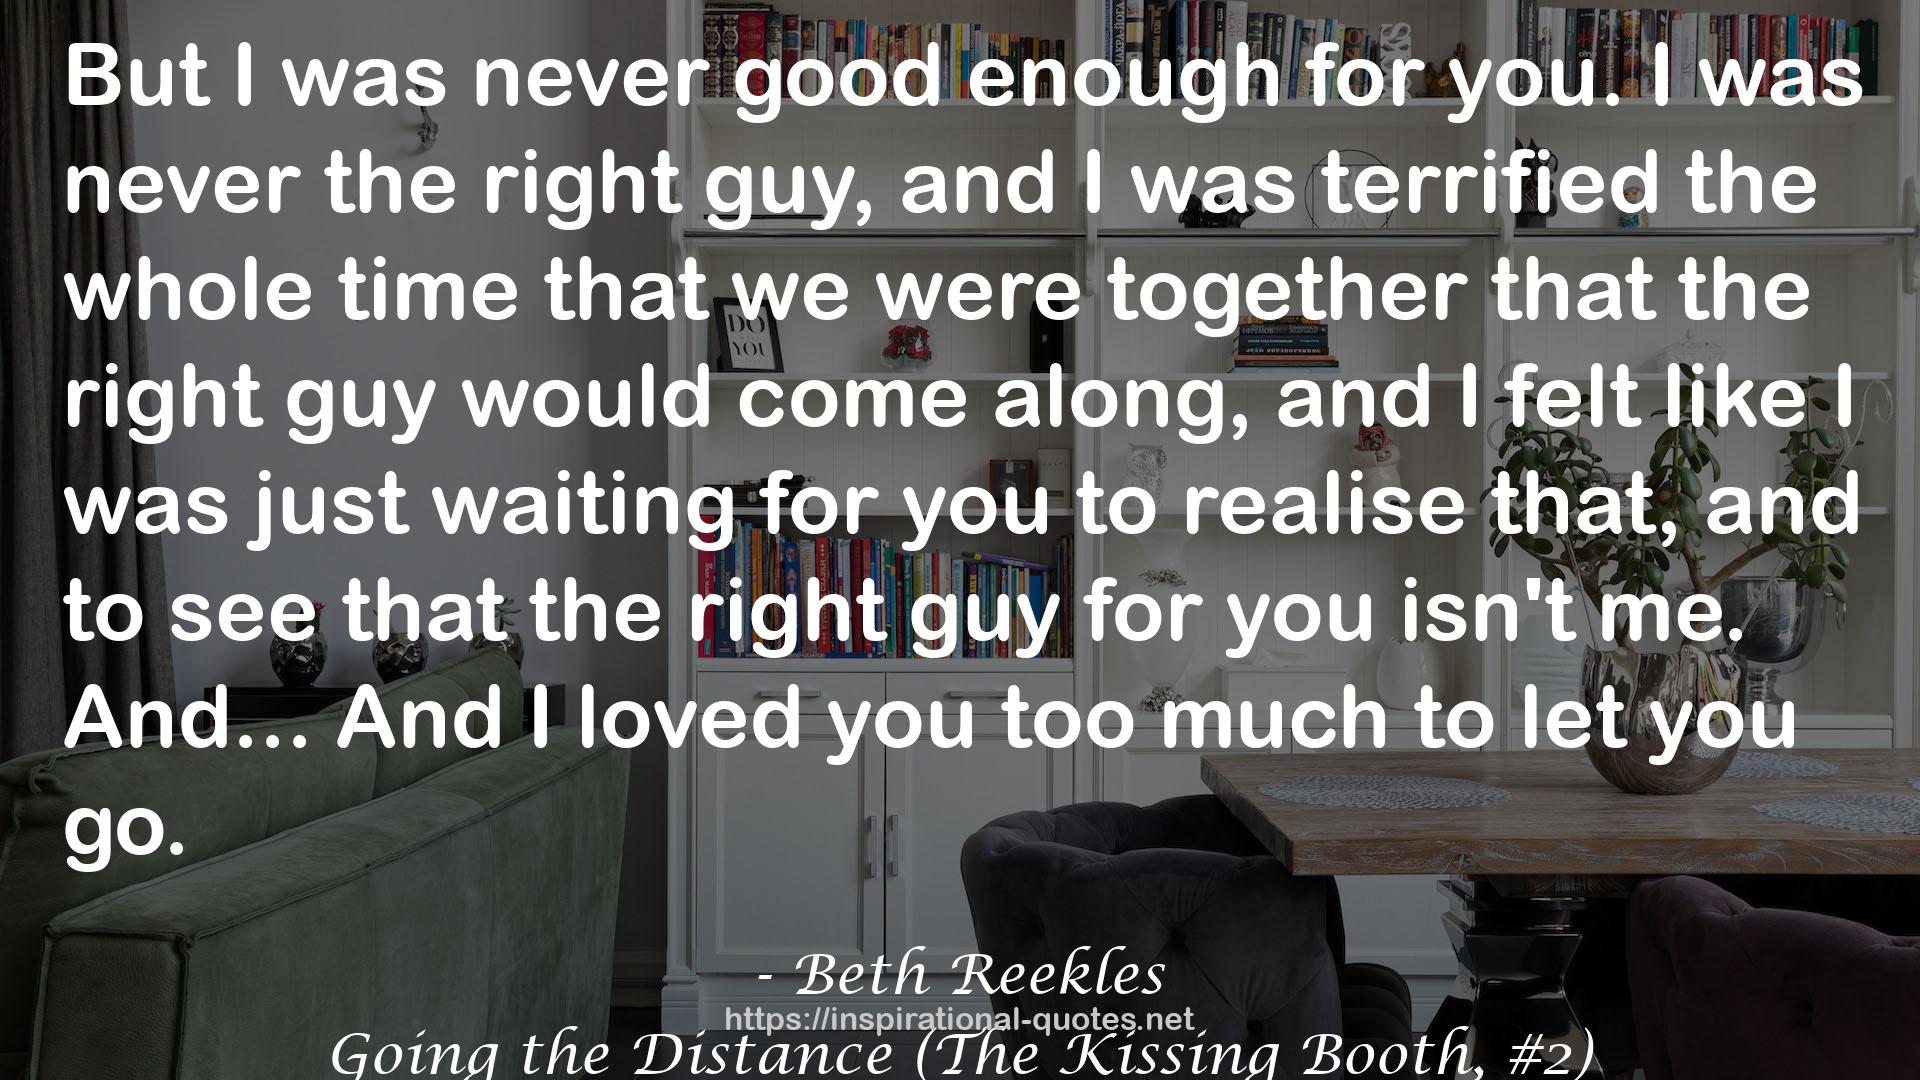 Going the Distance (The Kissing Booth, #2) QUOTES